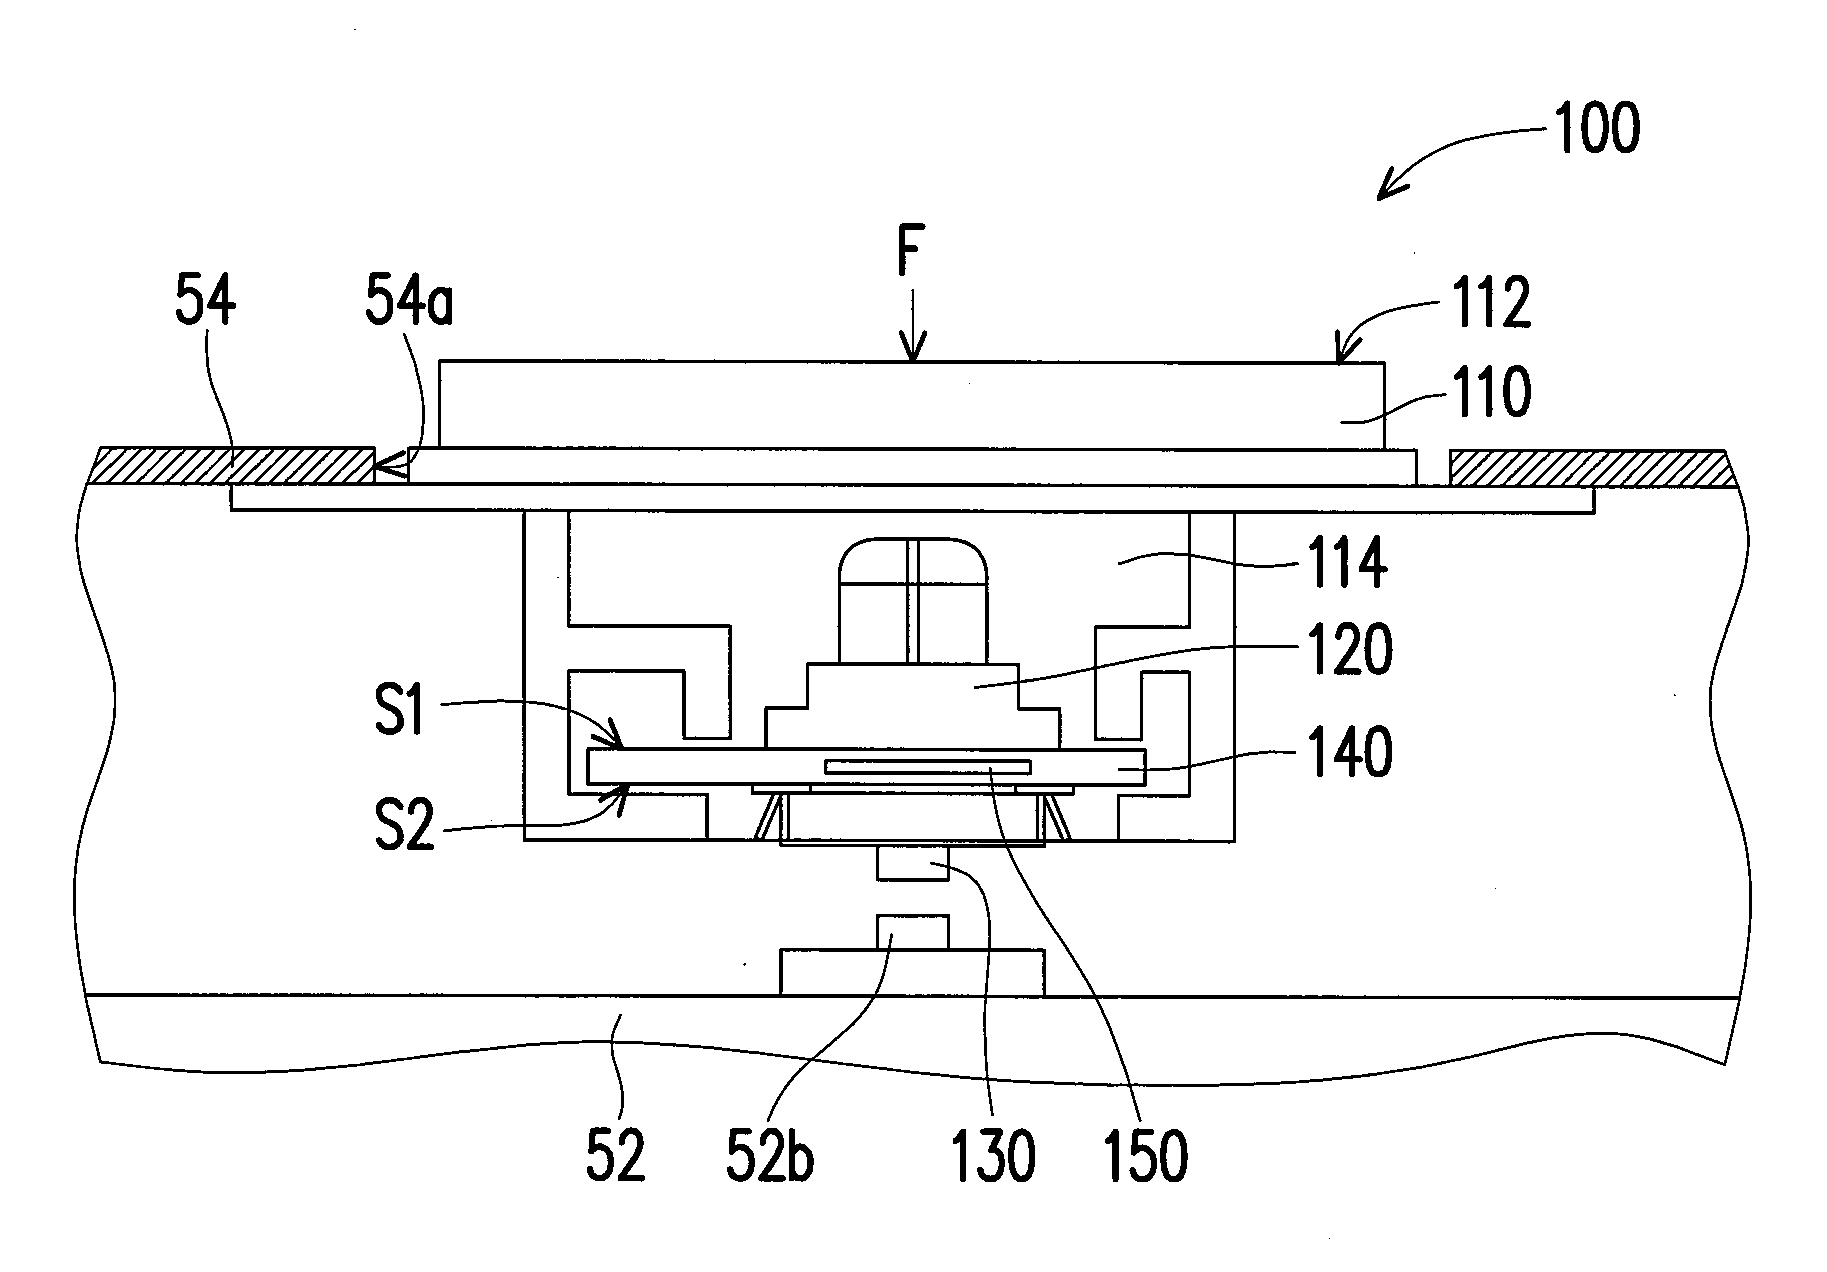 Button assembly and handheld electronic device